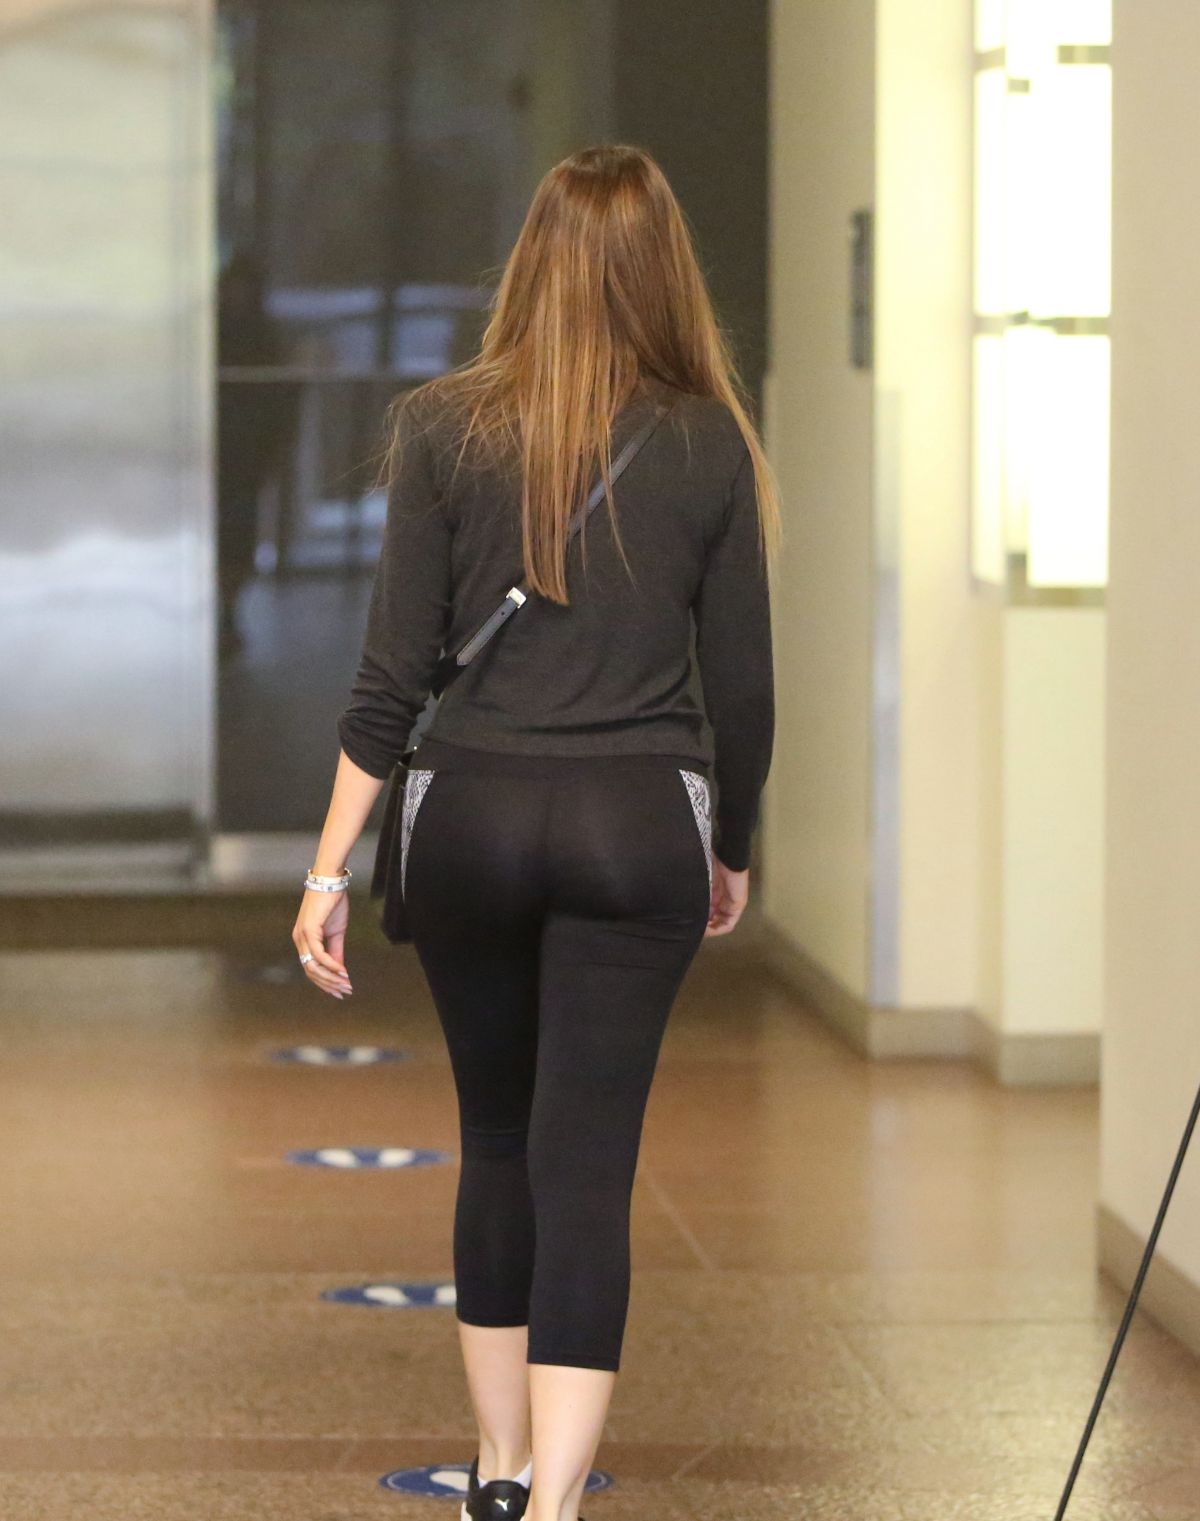 Sofia Vergara in Tights Out and About in Los Angeles 2020/10/22